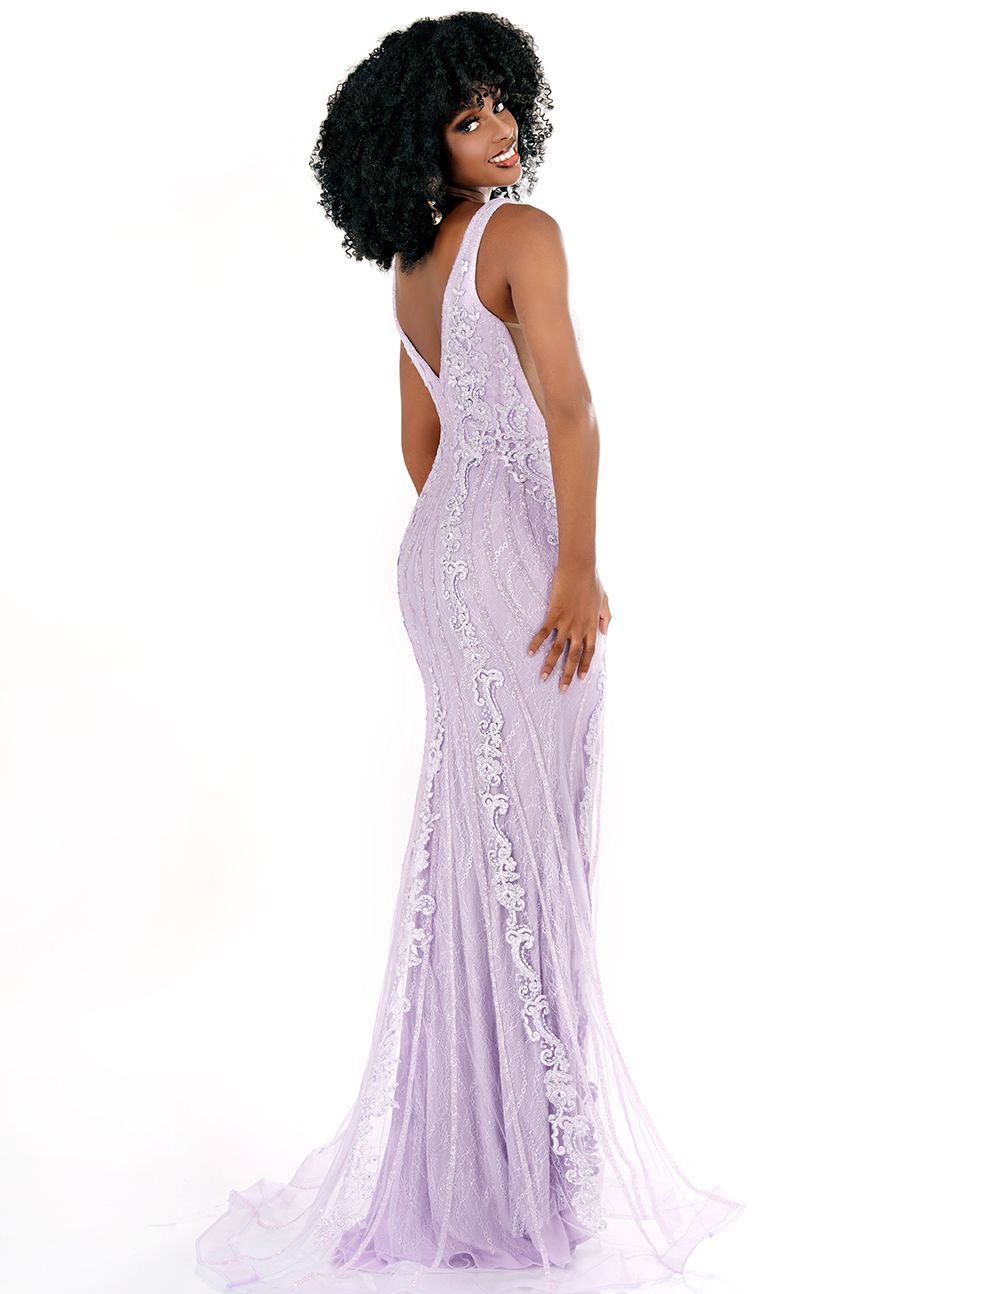 Experience the elegance of this lip-pleated "Cecilia Couture 1570" evening gown made from a high-quality sequin-sparkle fabric. It is a long fitted dress with a V-neck design, featuring a lace-embellished bodice and ruched waistline. It is perfect for your next special event!  Sizes: 0-20  Colors: Lilac, Champagne